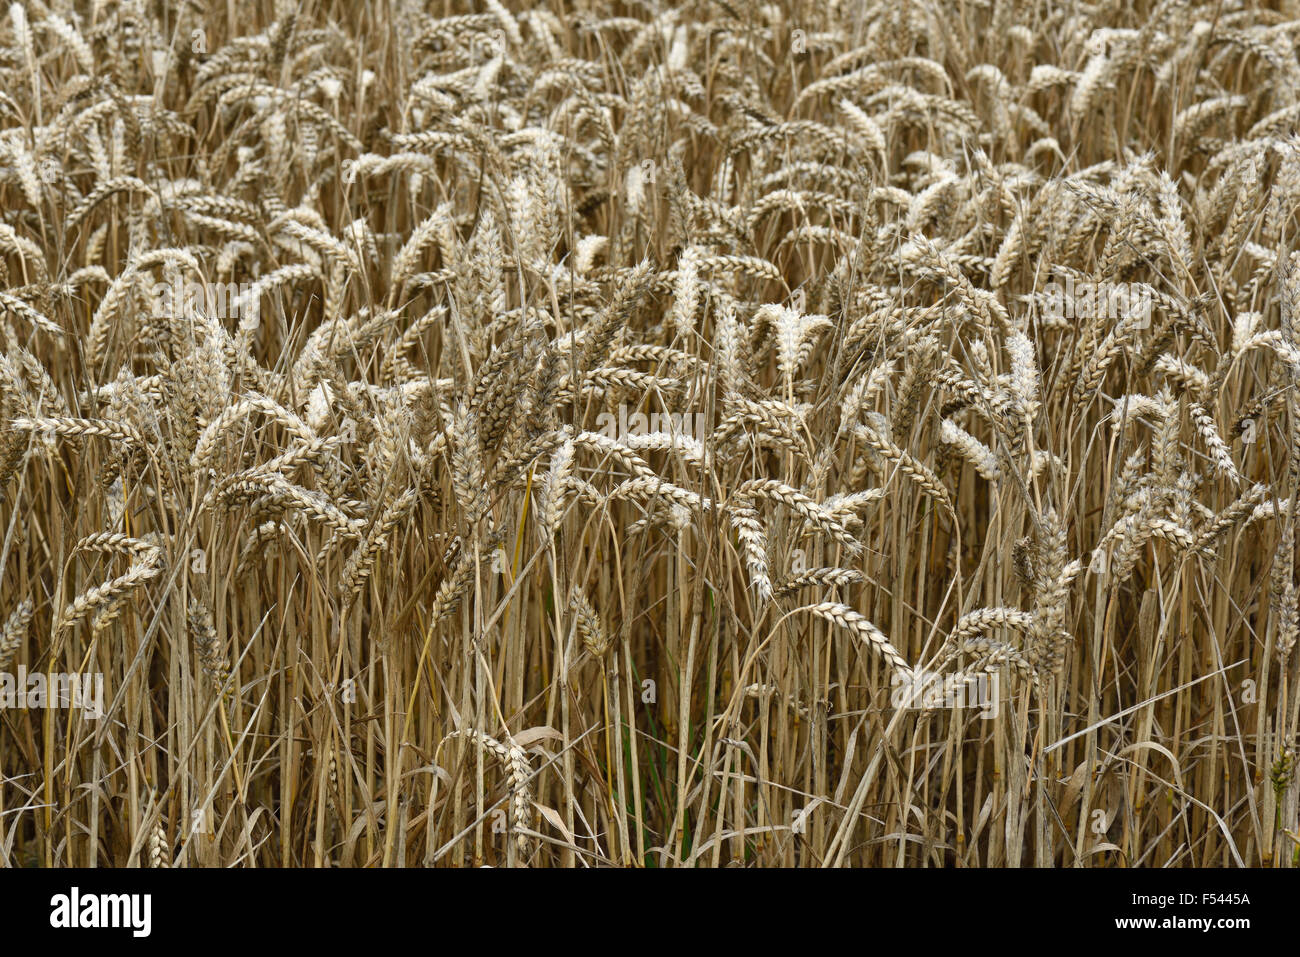 Ears of ripe wheat in crop passed its harvest date because of wet weather, some evidence of sooty mould developing, Berkshire Stock Photo